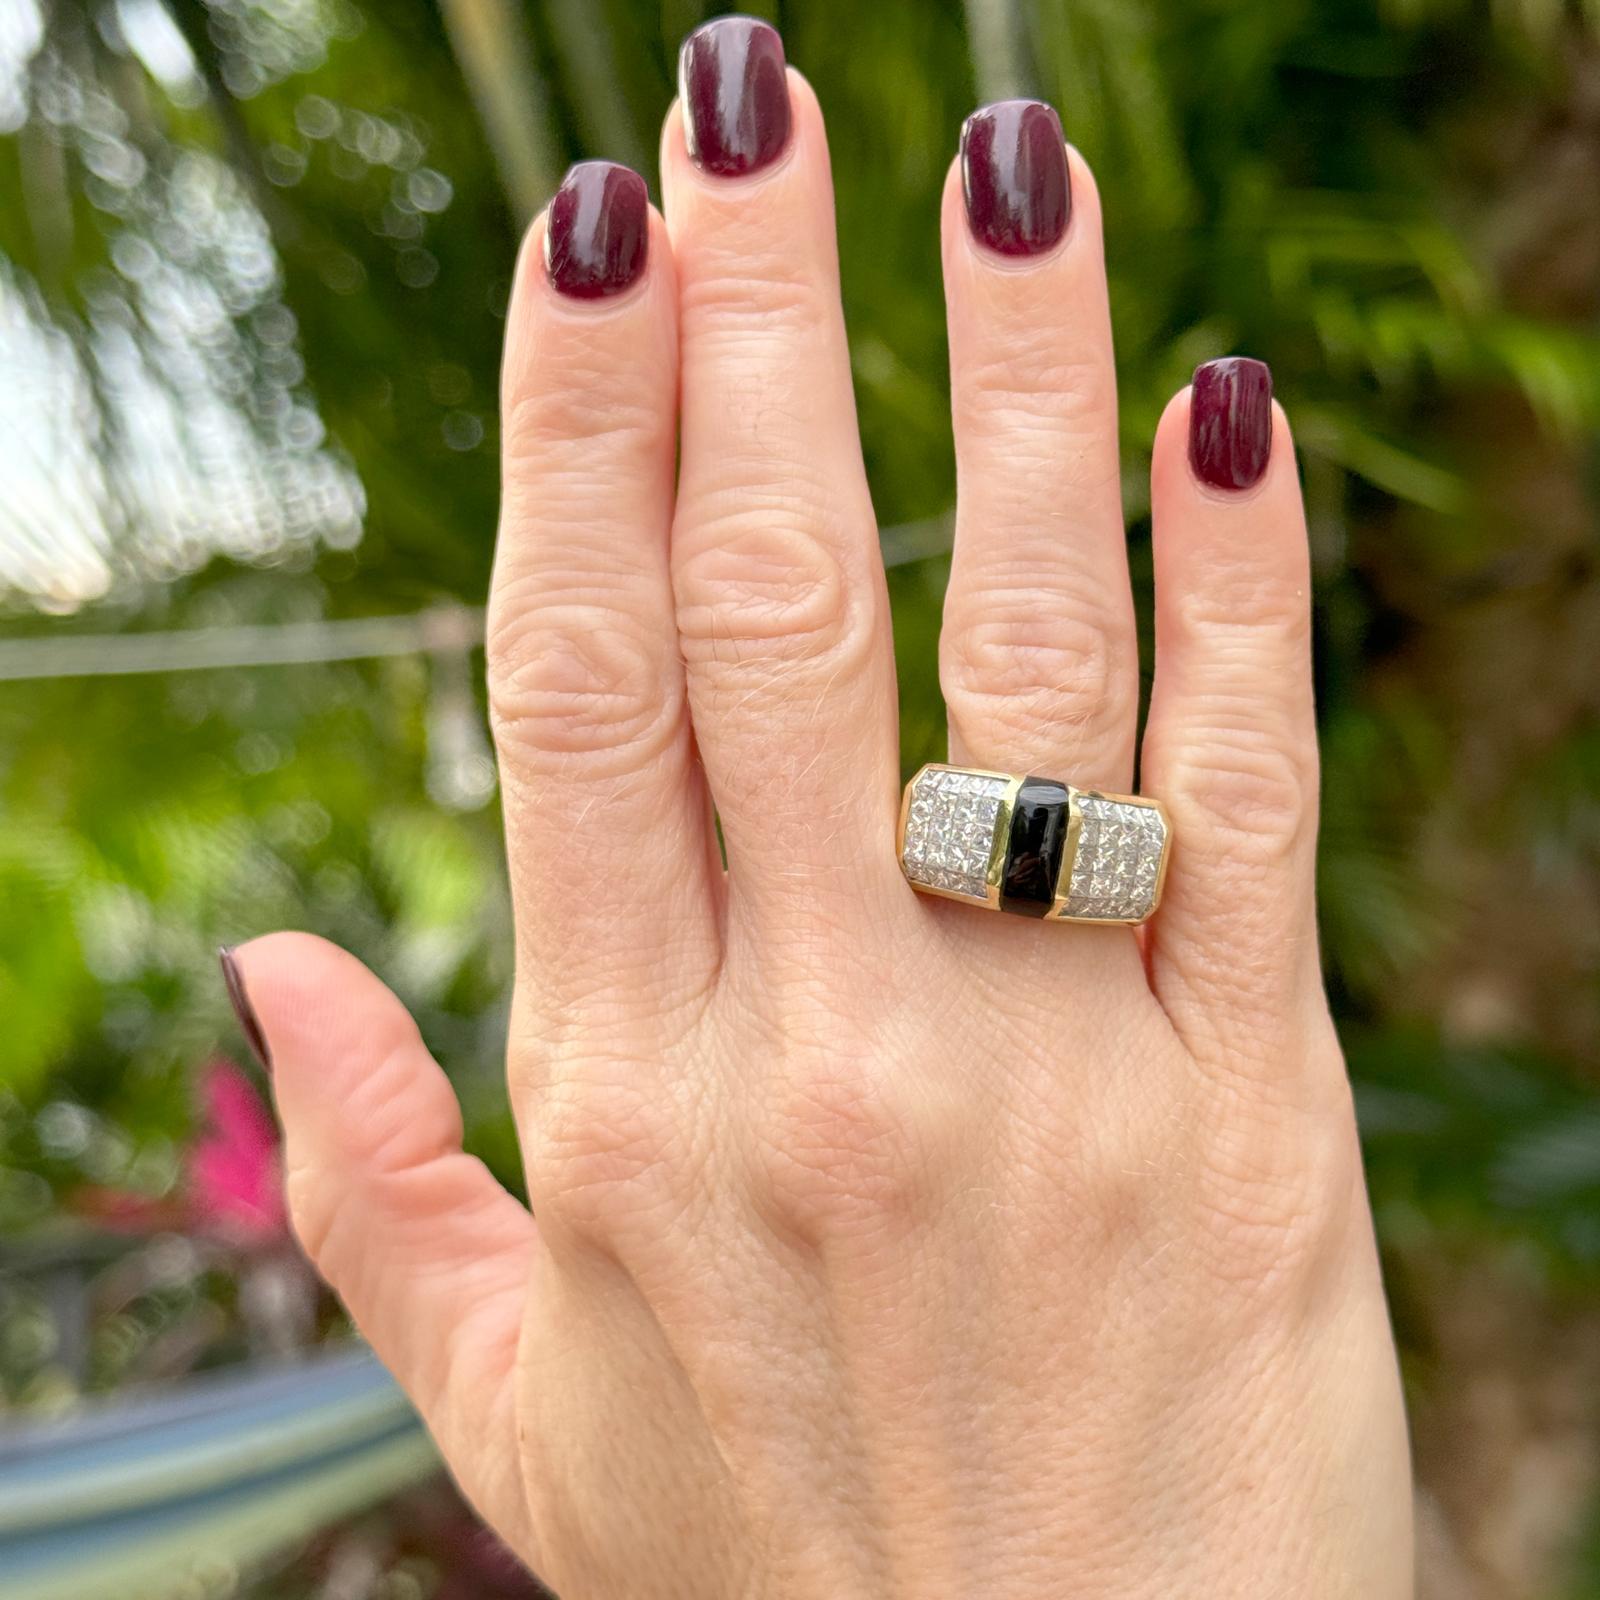 Contemporary invisibly set diamond and onyx ring handcrafted in 18 karat yellow gold. The ring features 40 princess cut diamonds weighing approximately 2.00 carat total weight and graded G-H color and SI1 clarity. The center is set with a cabochon